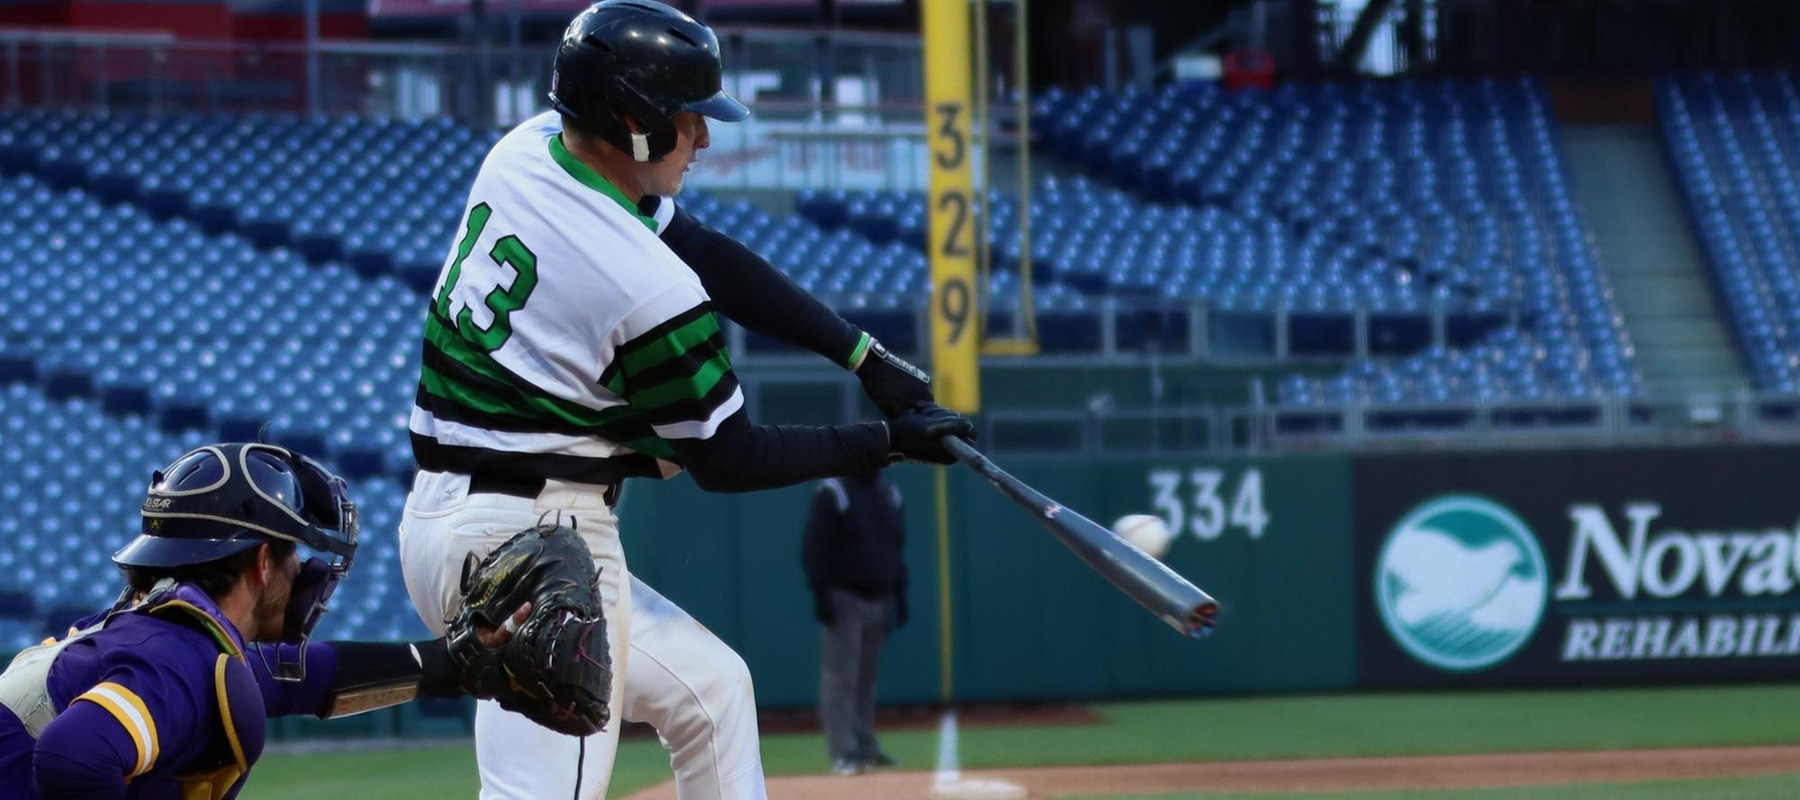 CFile photo of JJ Killen who hit a homer at Jefferson on Tuesday. opyright 2022; Wilmington University. All rights reserved. Photo by Dan Lauletta. April 19, 2022 vs. West Chester at Citizens Bank Park.